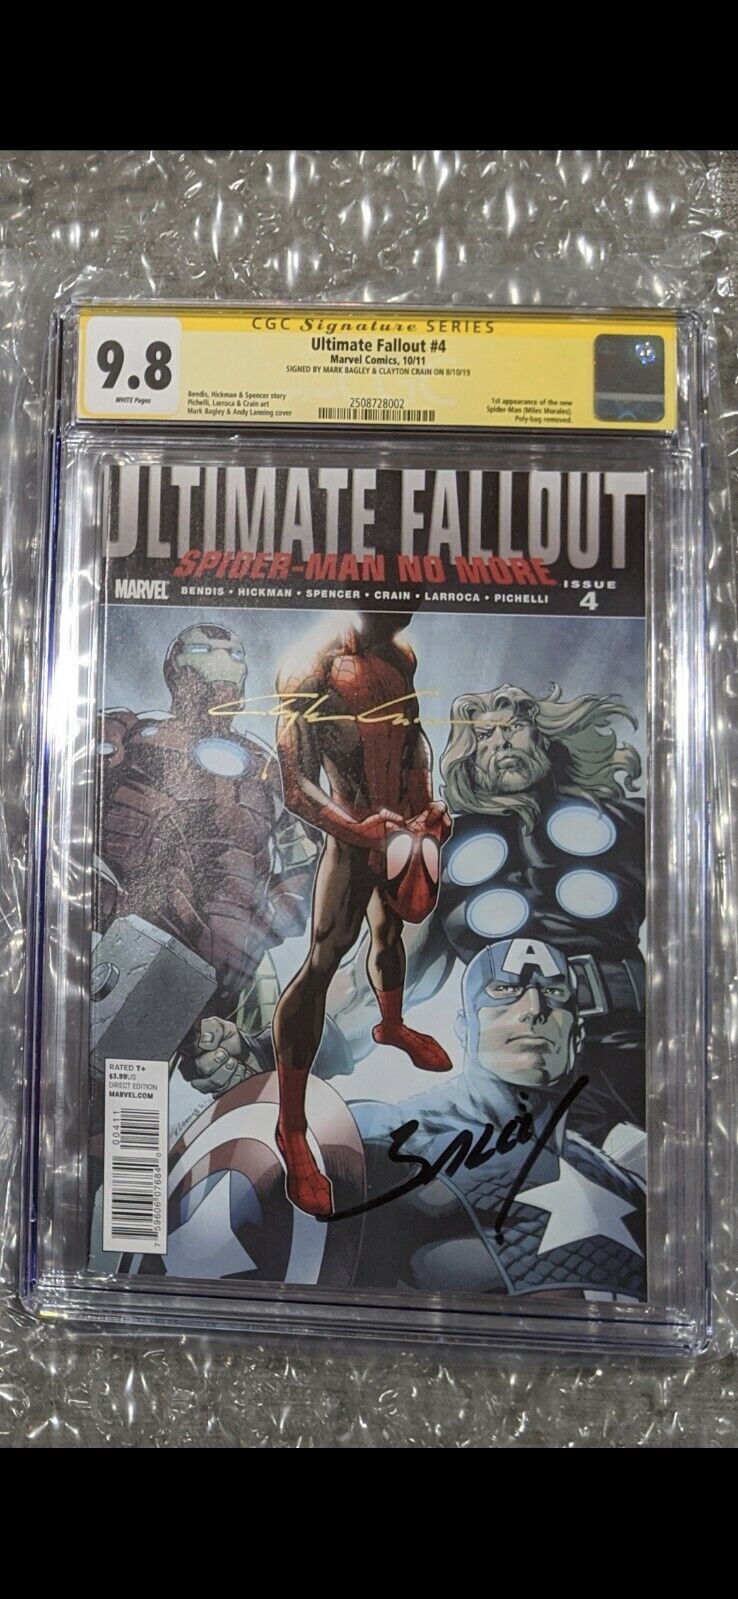 Ultimate Fallout 4 (CGC 9.8) Double Signed By BAGLEY and CRAIN (1ST Print)...